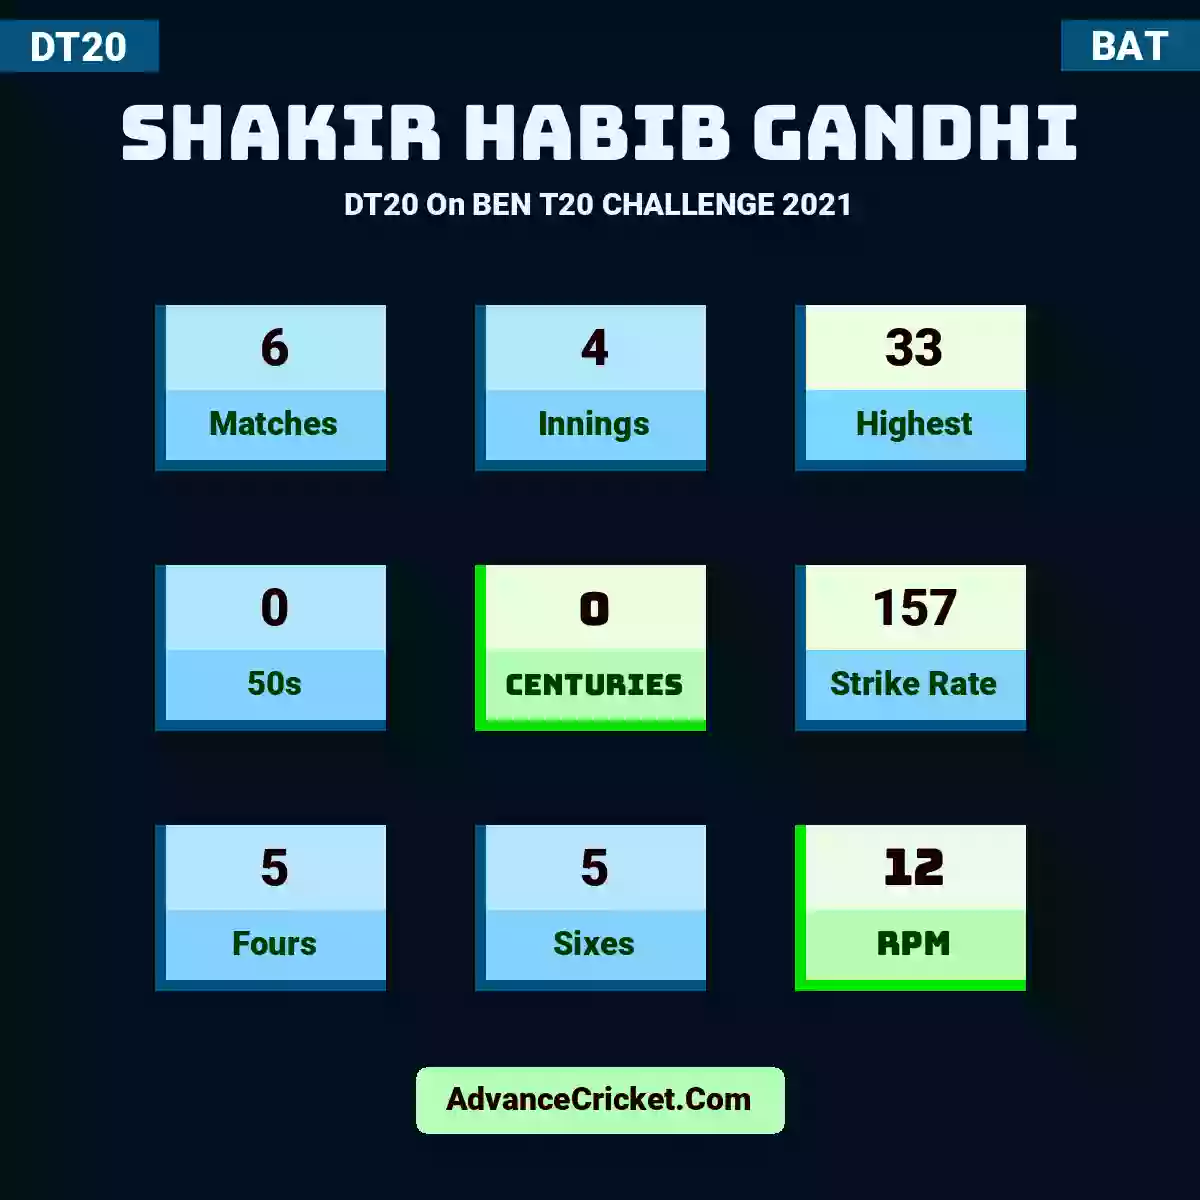 Shakir Habib Gandhi DT20  On BEN T20 CHALLENGE 2021, Shakir Habib Gandhi played 6 matches, scored 33 runs as highest, 0 half-centuries, and 0 centuries, with a strike rate of 157. S.Gandhi hit 5 fours and 5 sixes, with an RPM of 12.